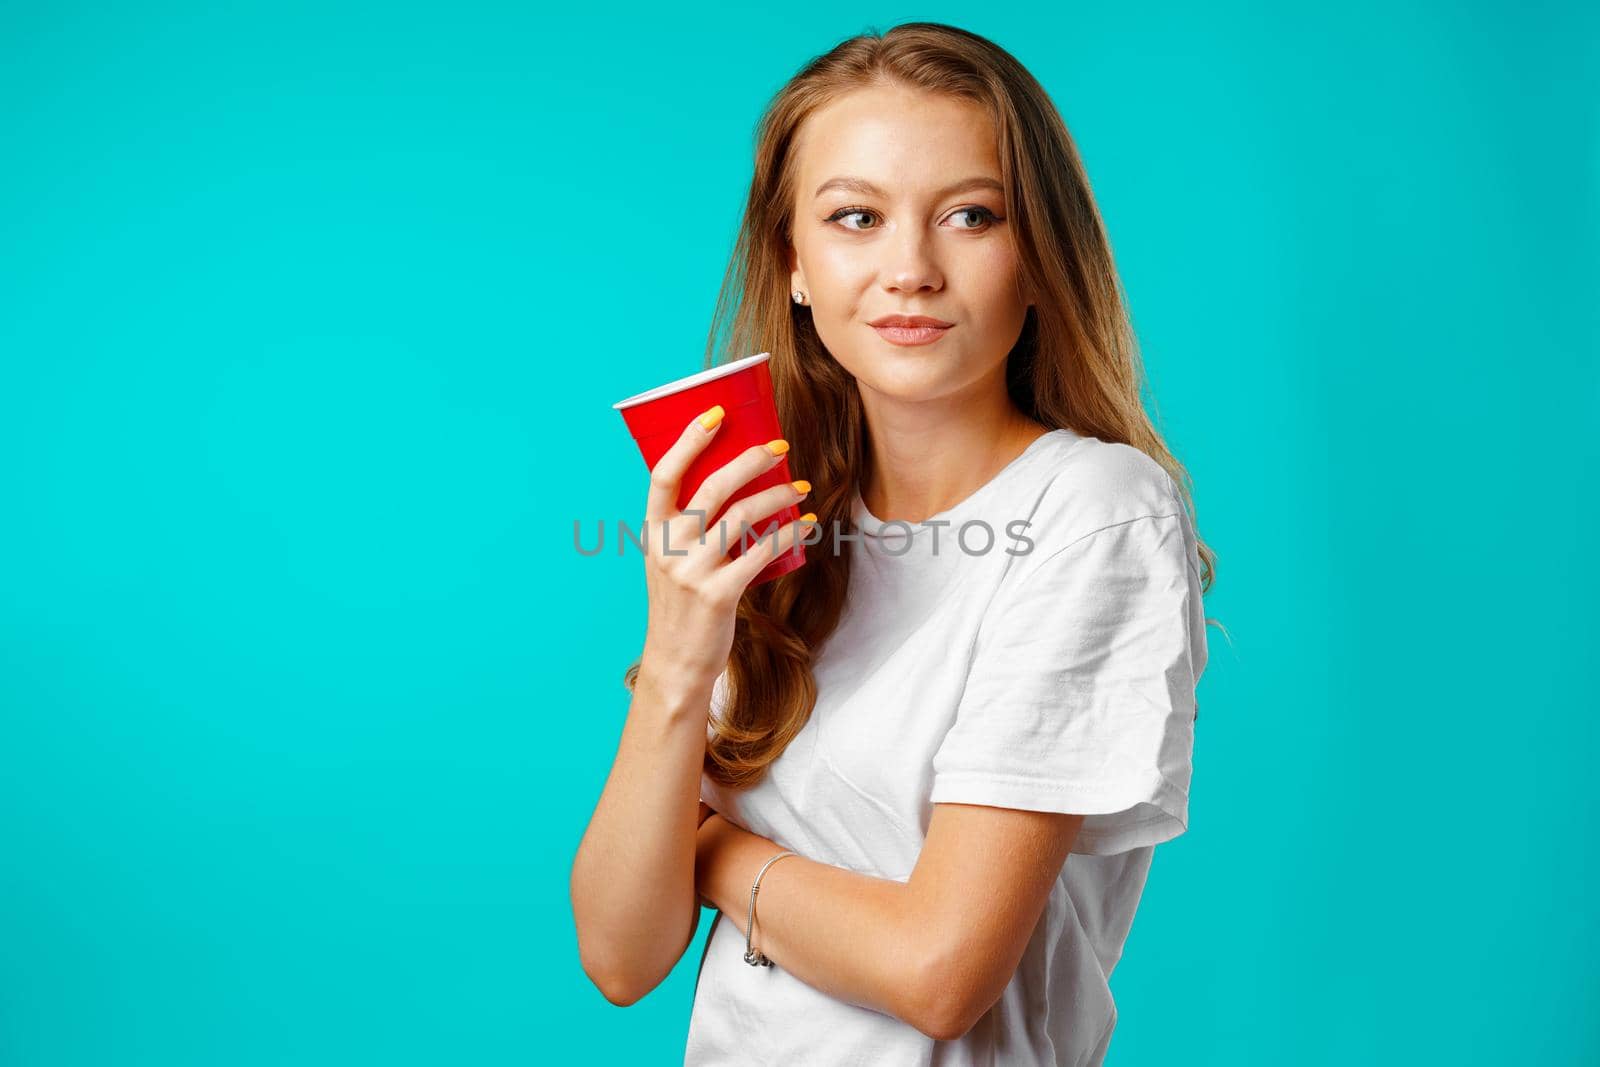 Young attractive woman holding a cup of hot drink against blue background